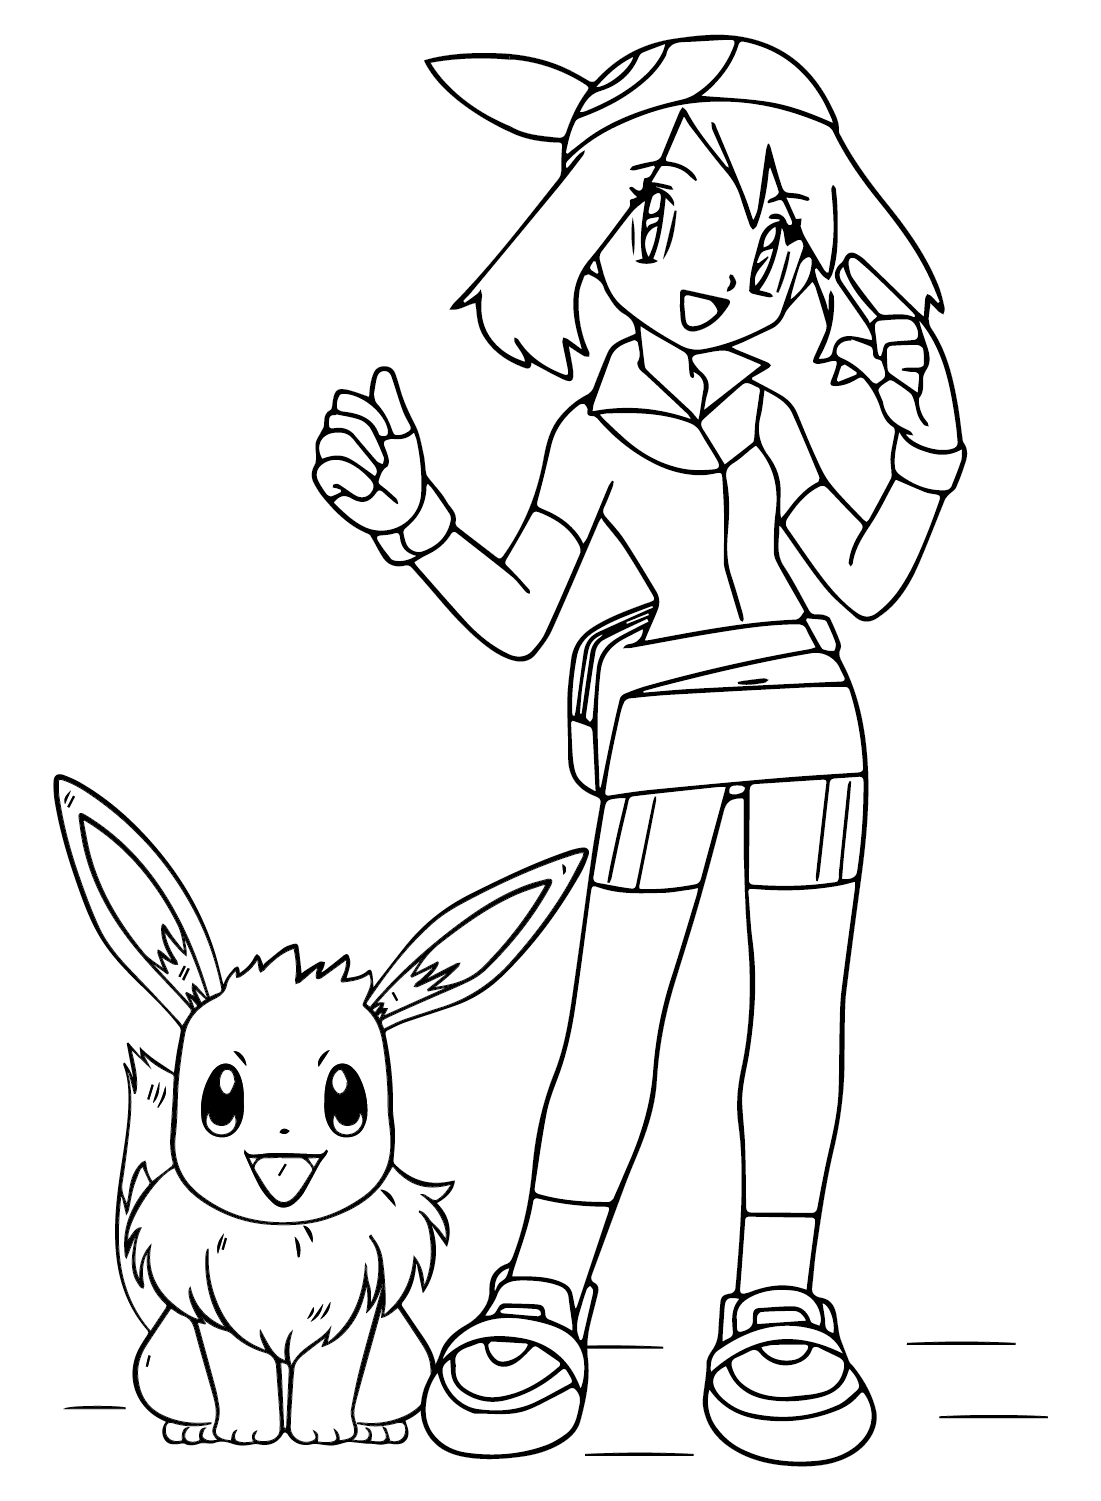 May Pokemon Coloring Pictures from May Pokemon